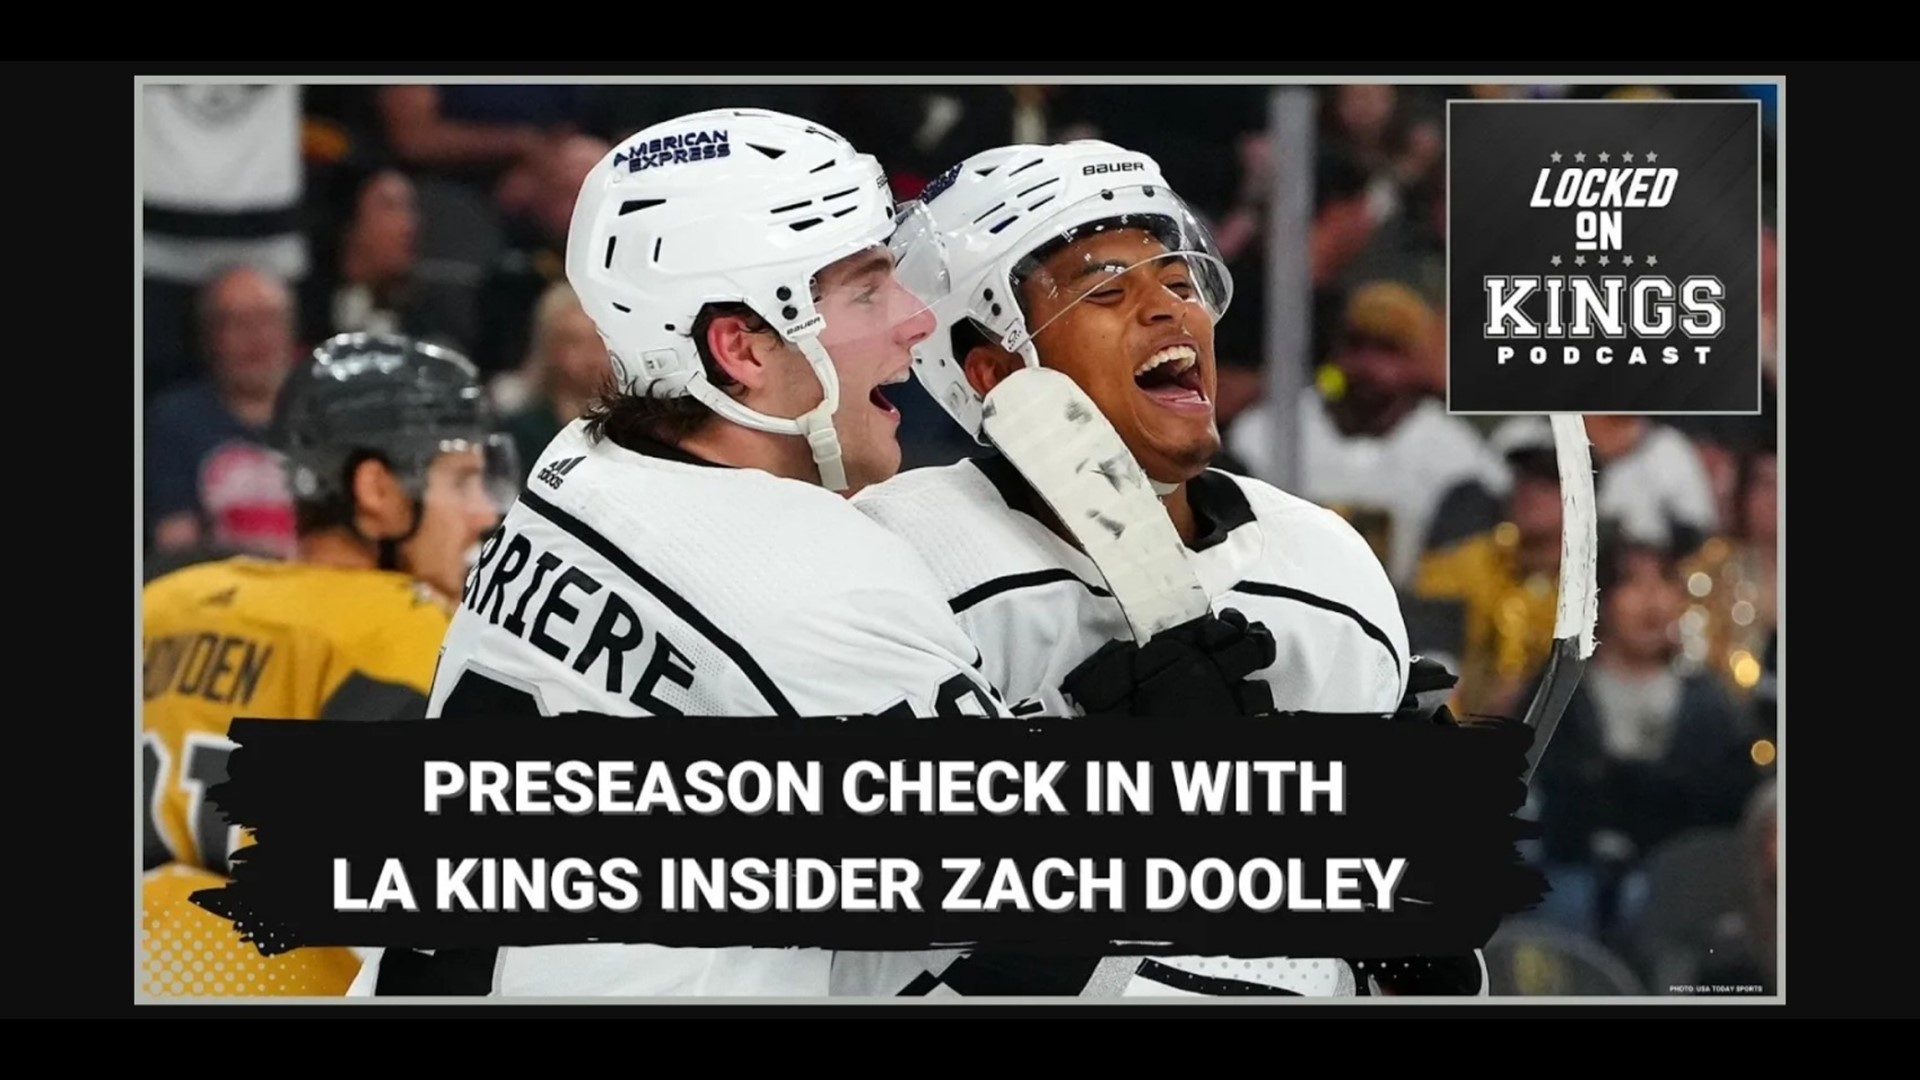 We get a firsthand recap of the Kings trip to Australia plus thoughts on what we have seen so far this preseason with the LA Kings Insider, Zach Dooley.